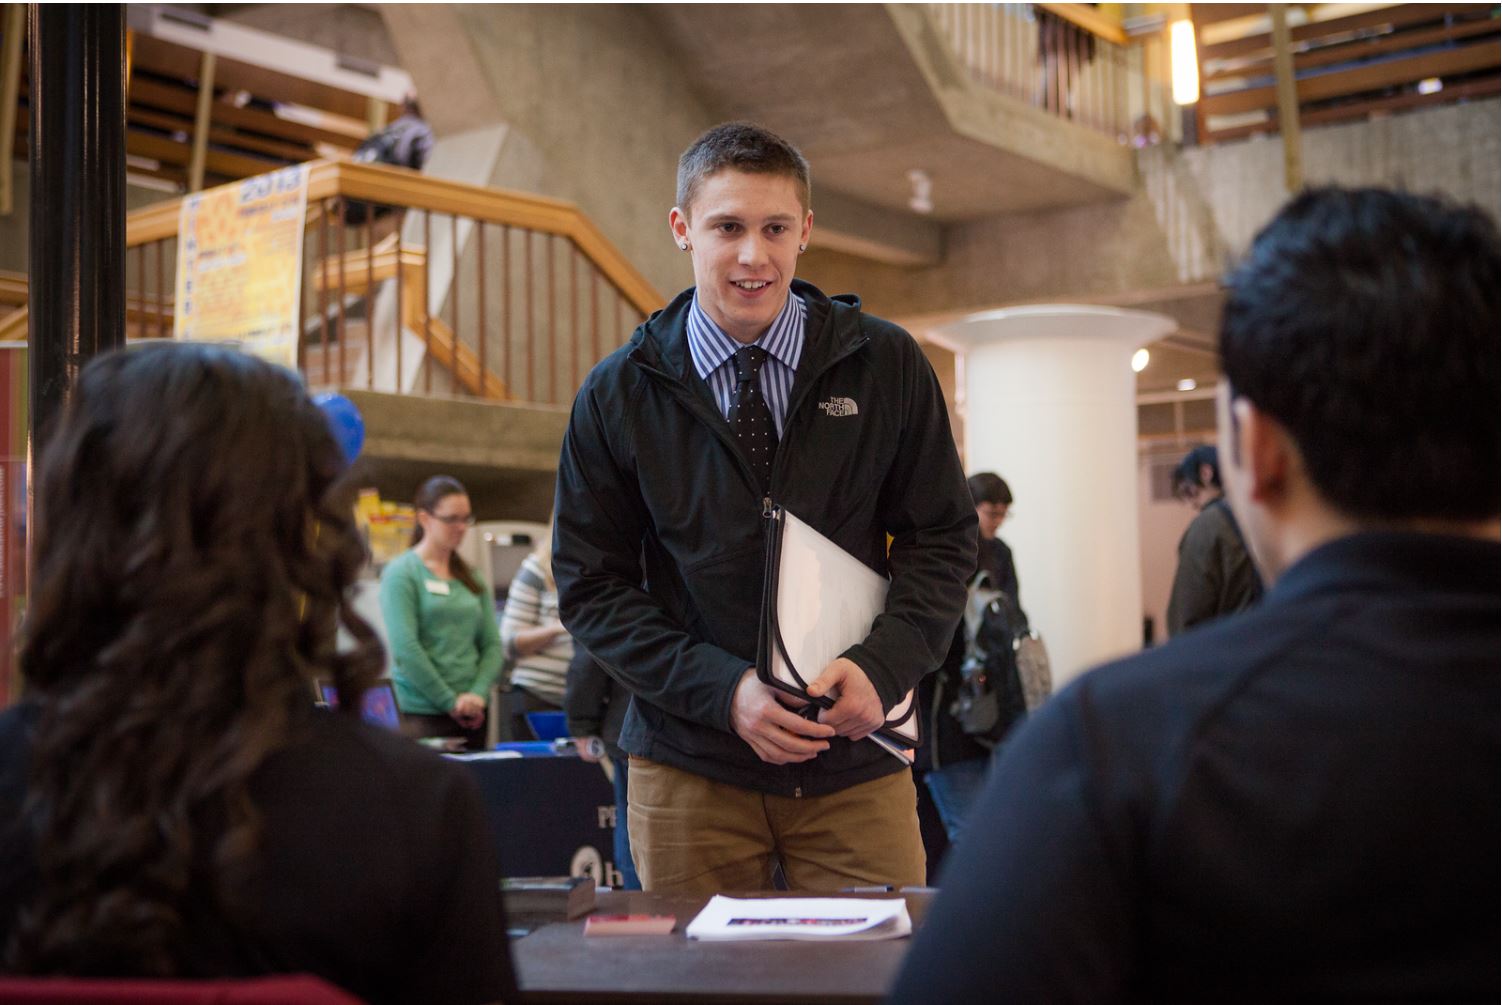 Joshua Liebhober speaks to potential summer job opportunities at the Student Job and Internship Fair provided by UAF Career Services.